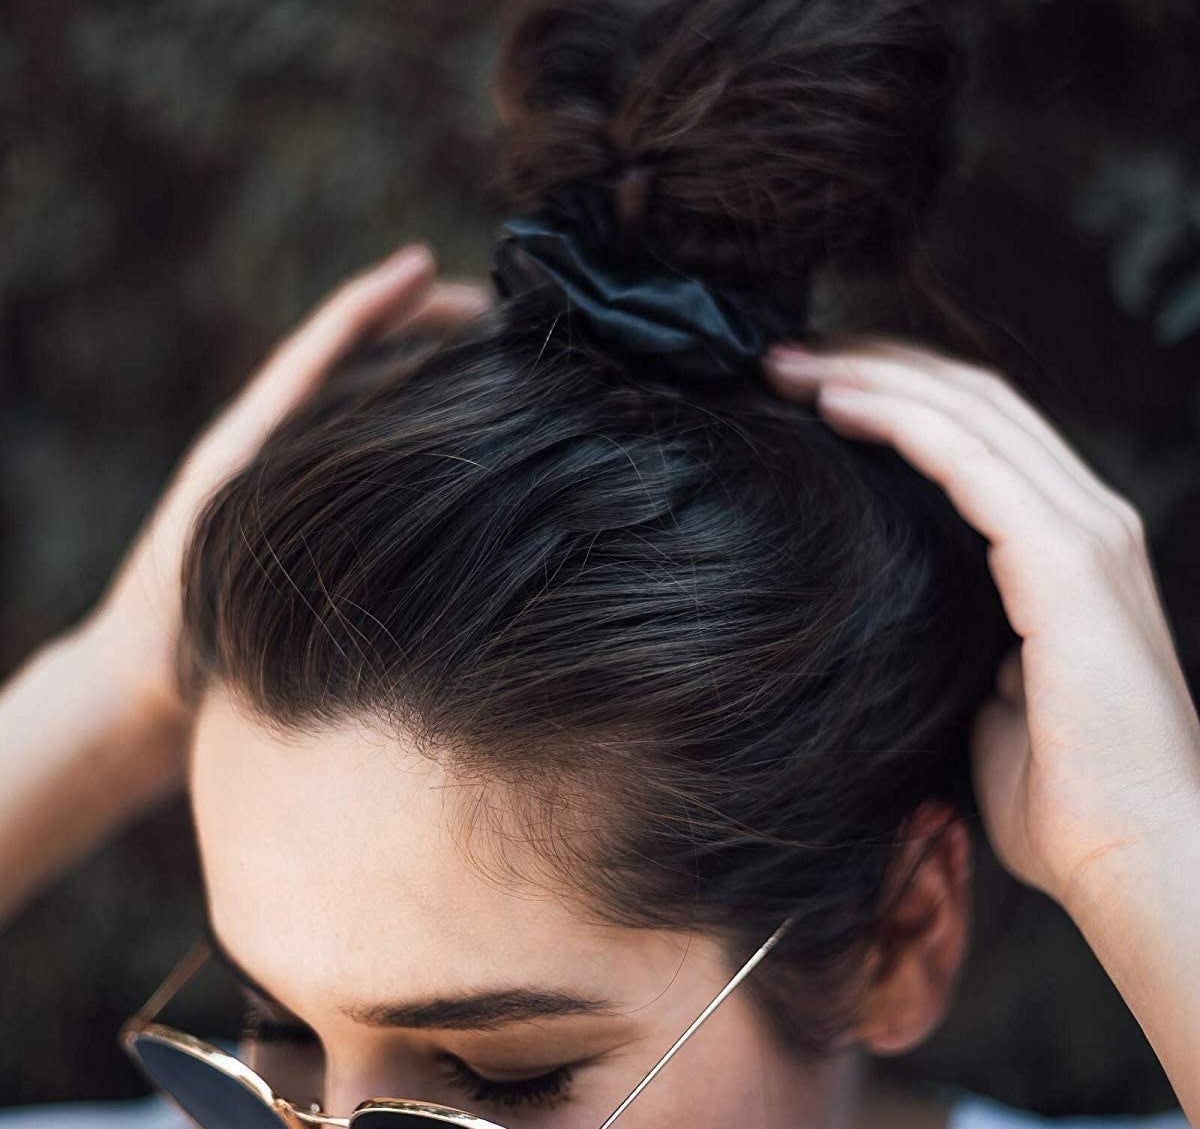 A person wearing sunglasses and a silk scrunchie in their hair